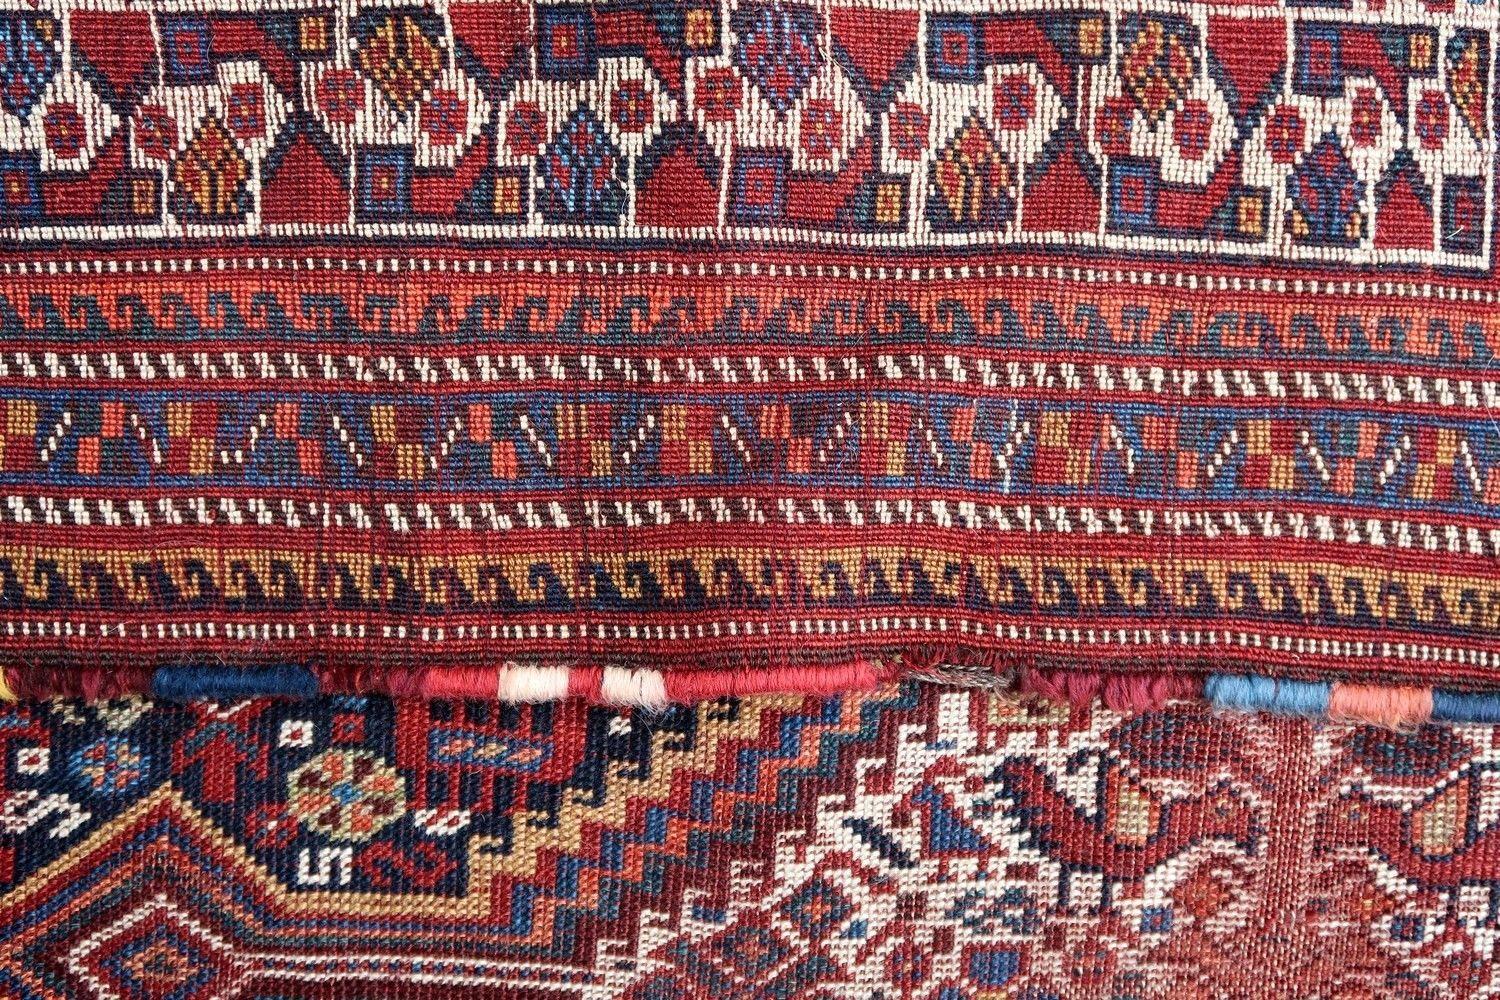 Handmade antique Gashkai rug in original condition, has some age wear. The rug is from the beginning of 20th century.

?-condition: distressed,

-circa: 1900s,

-size: 5' x 6.5' (80cm x 135cm),

-material: wool,

-country of origin: Middle